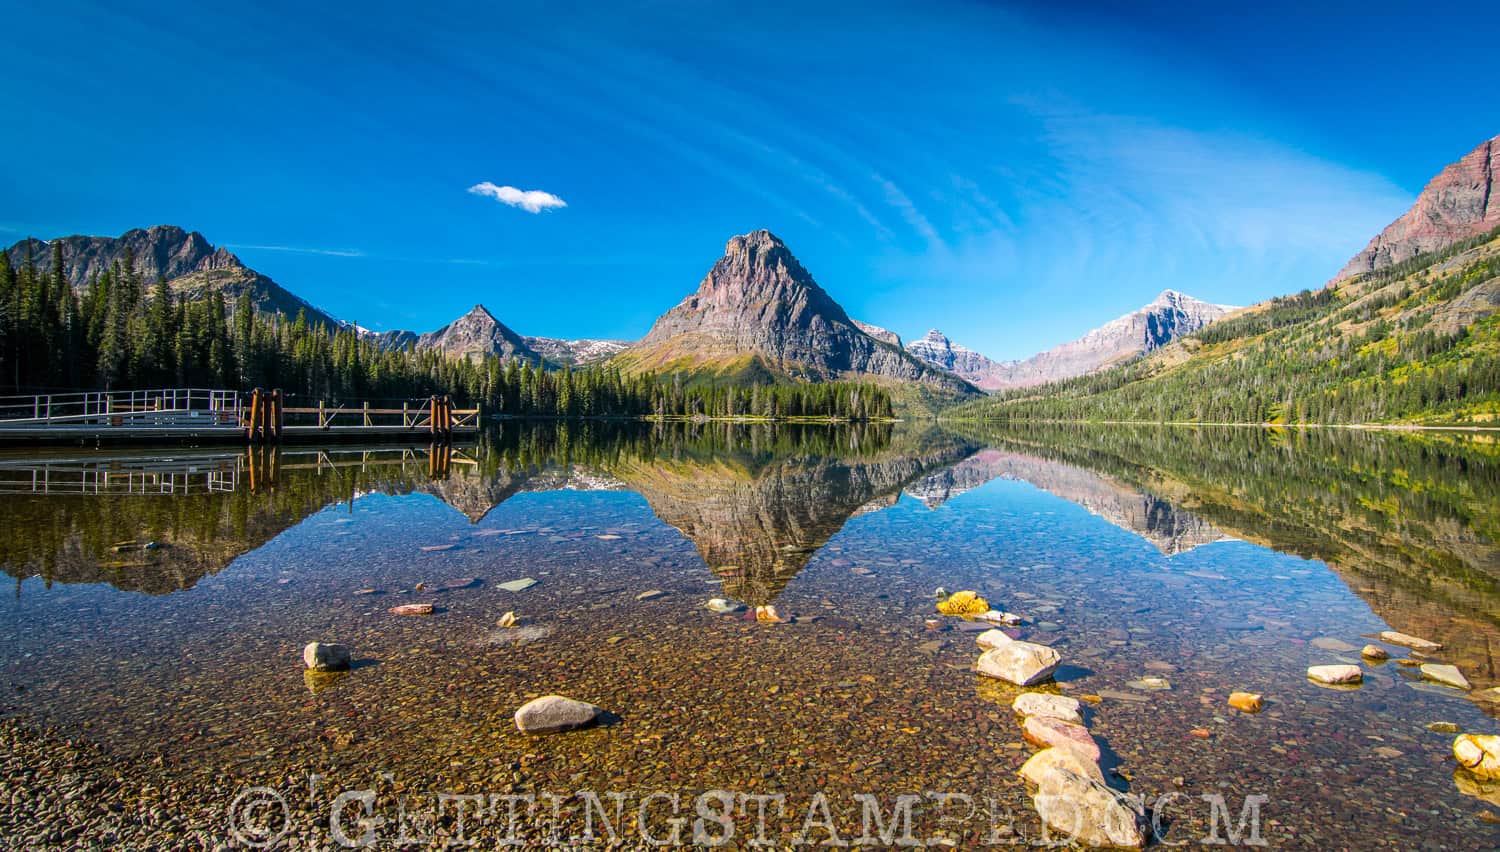 The Best Place for Sunset in Glacier National Park - GETTING STAMPED